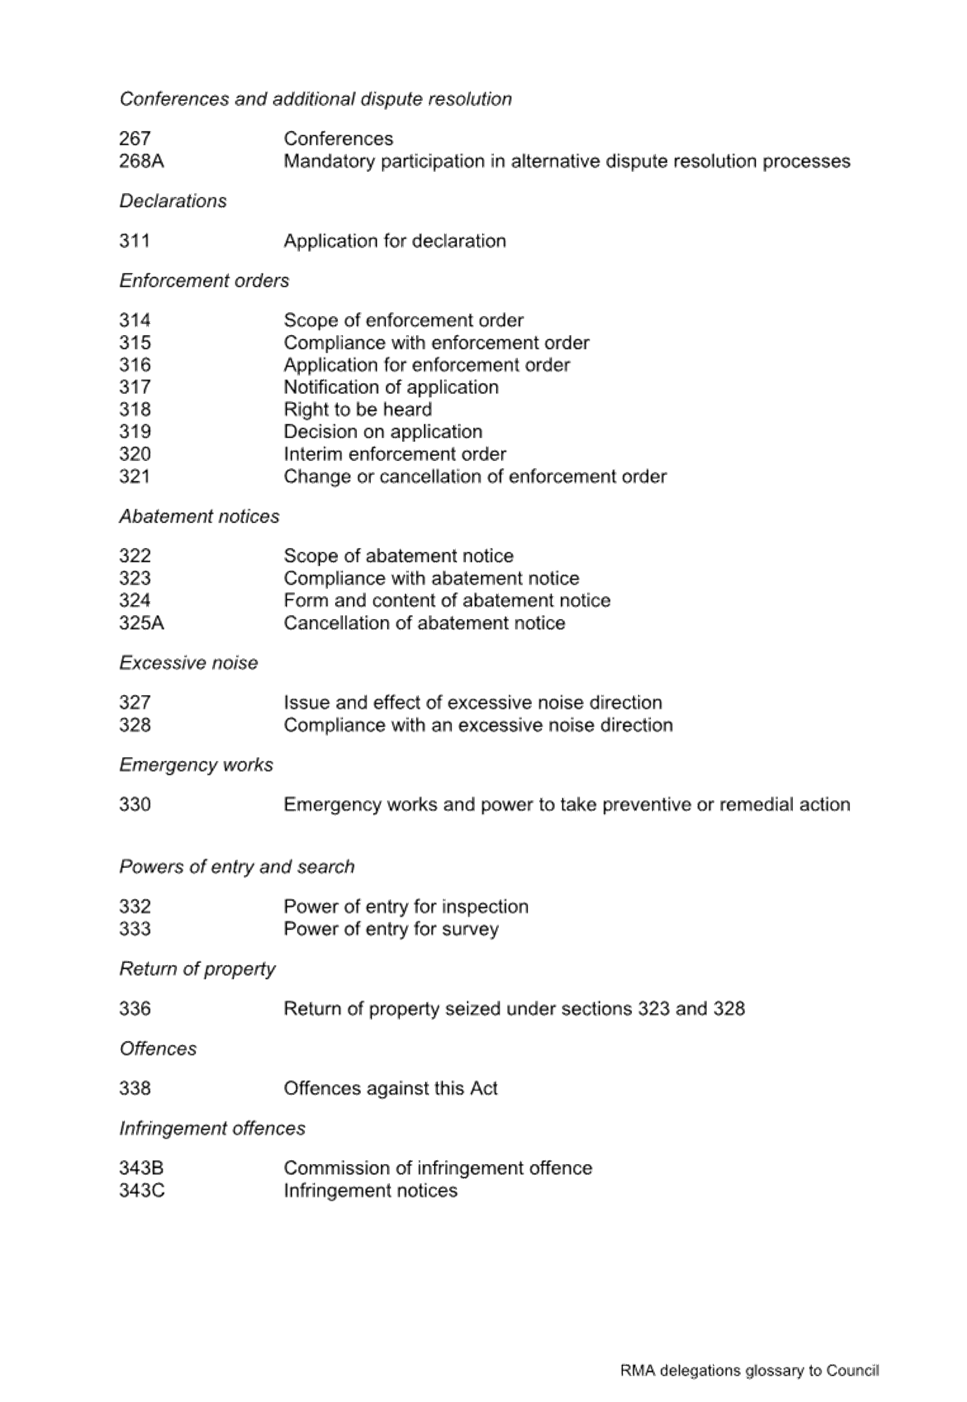 A document with black text

Description automatically generated